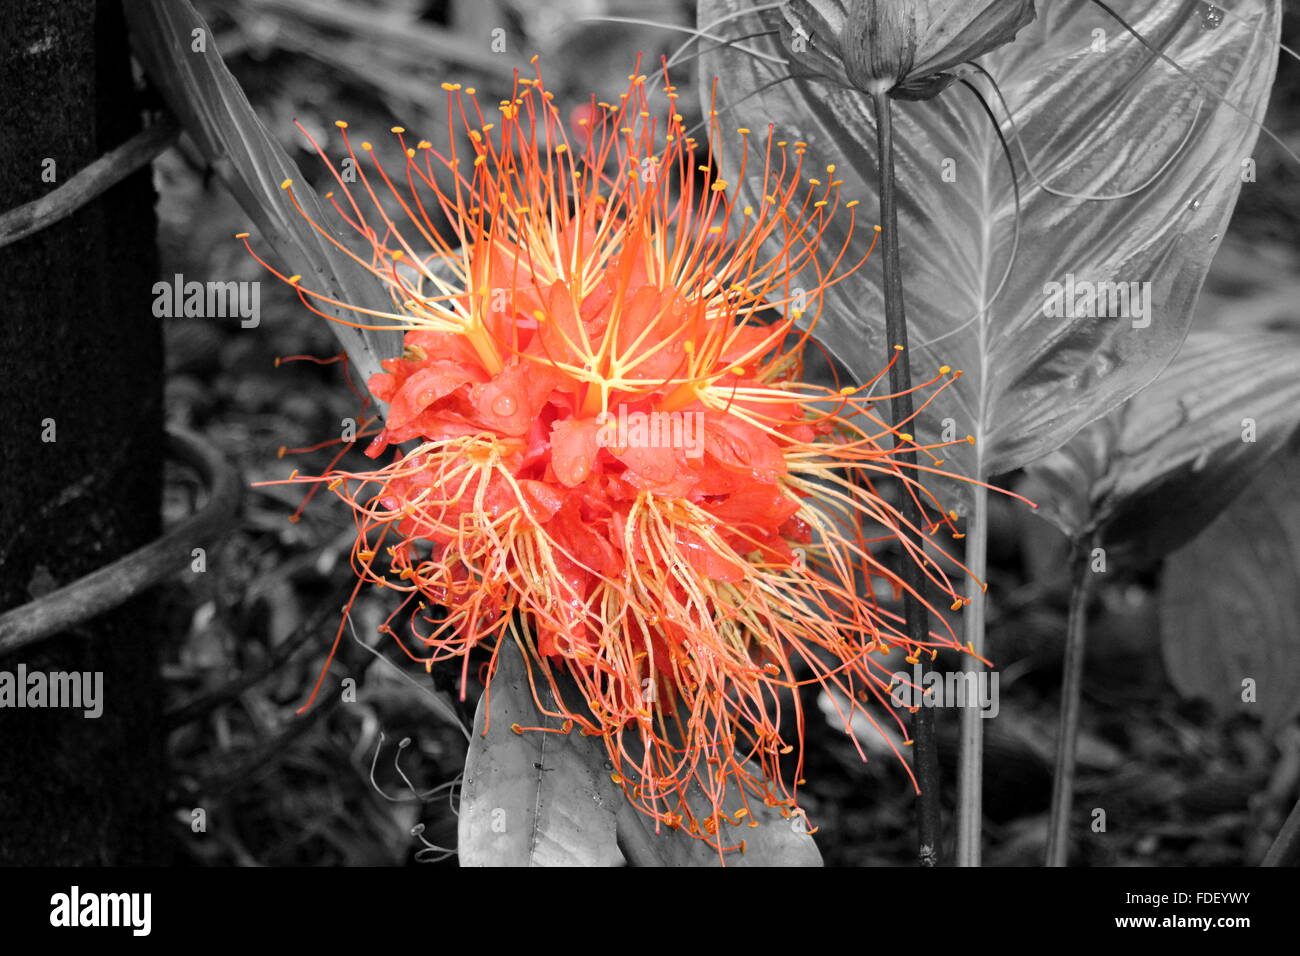 Black and white image of a red protea blossom Stock Photo